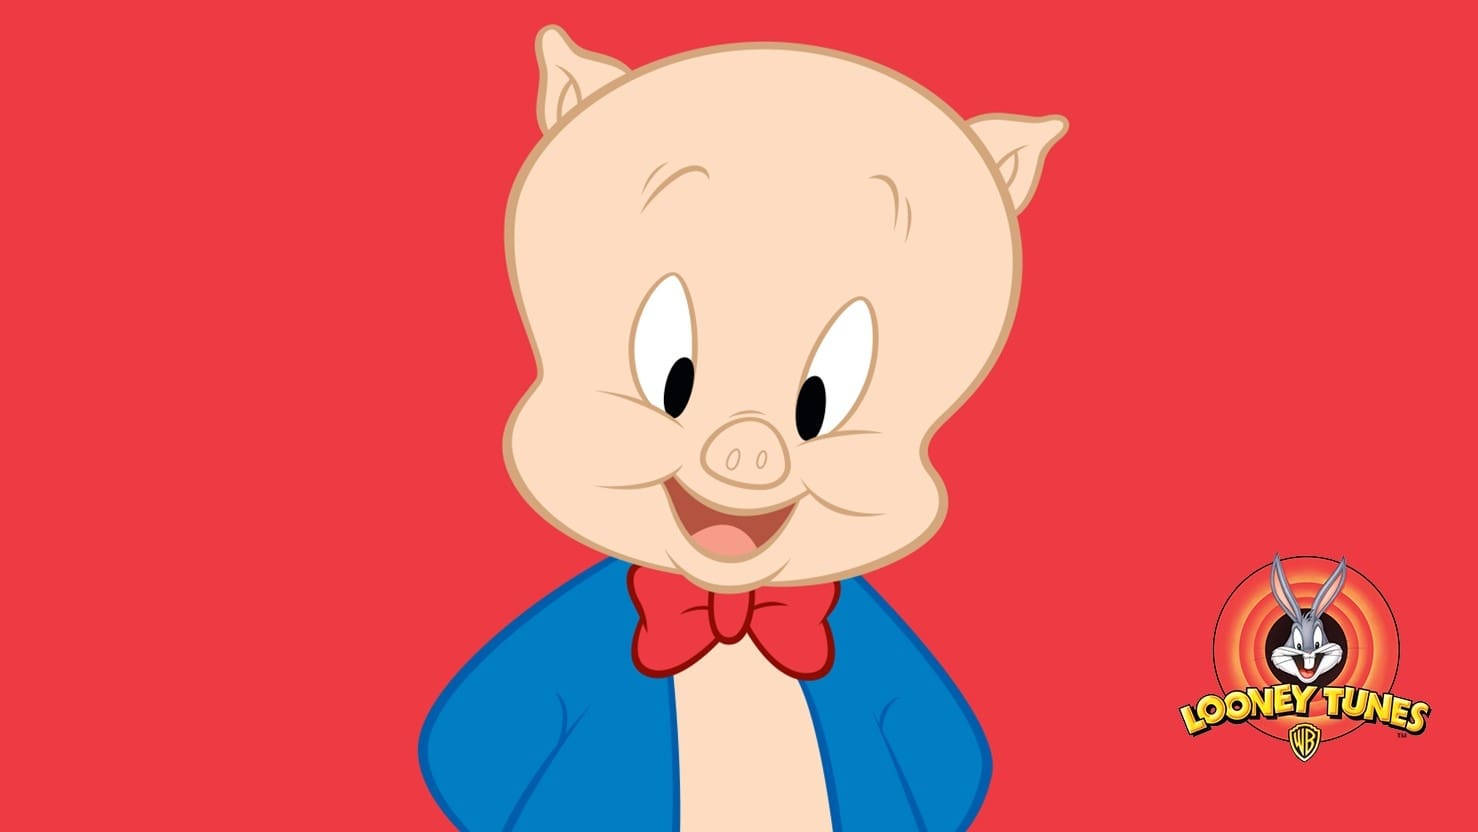 Porky Pig Solo Red Poster